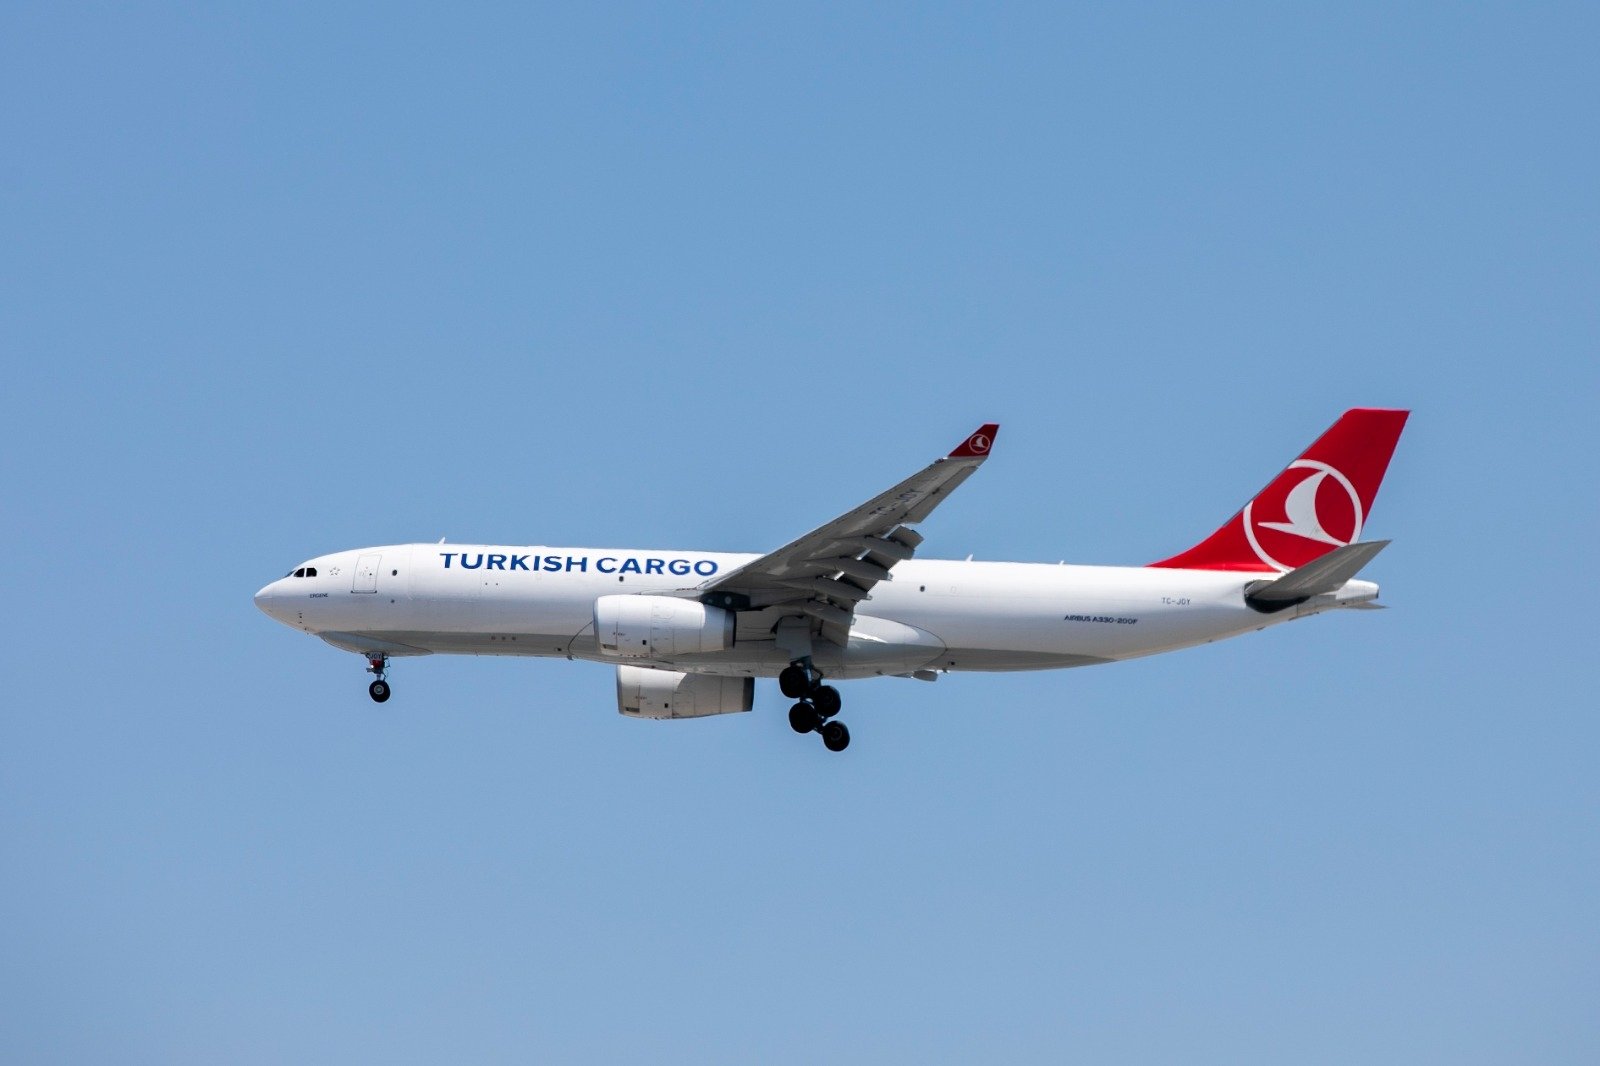 A Turkish Cargo plane seen in air in this undated file photo. (AA Photo)